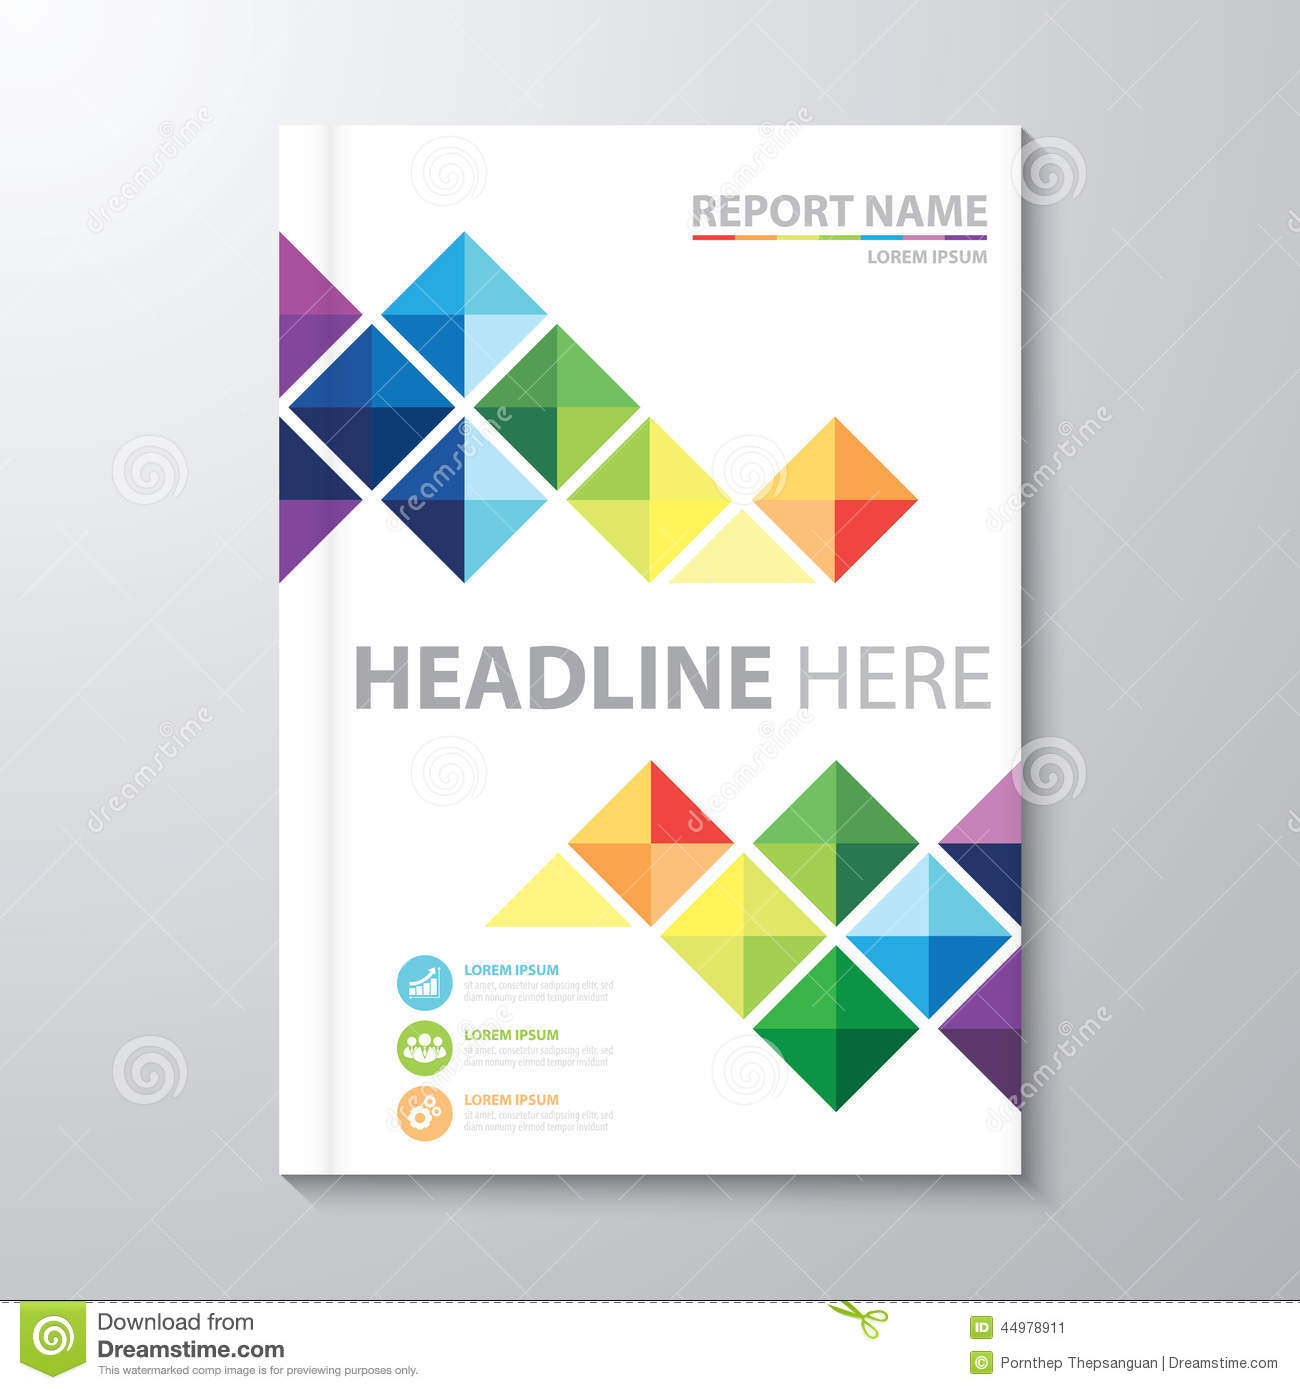 17 Report Cover Design Templates Images - Report Cover Page Templates